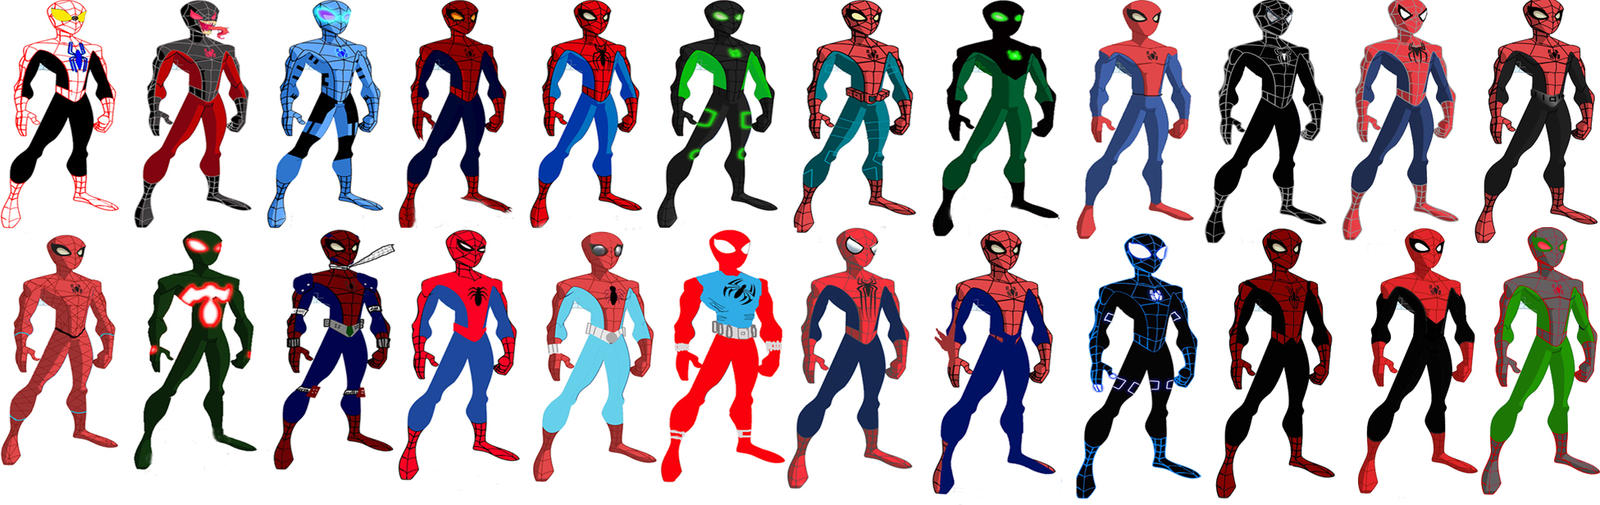 my_spider_man_suit_collection_by_stick_man_11-d81nvfc.jpg